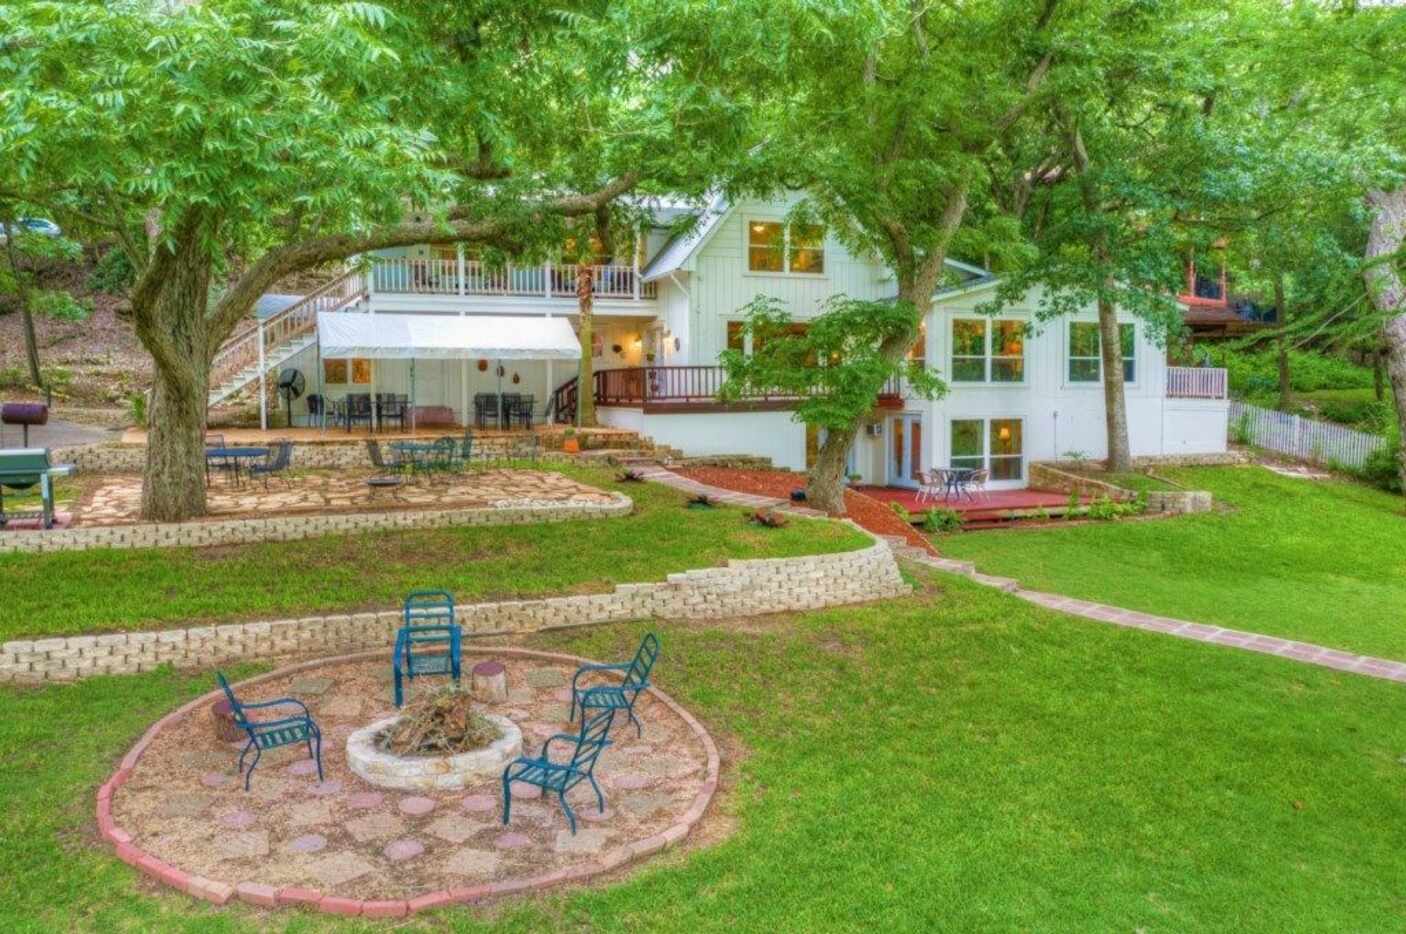 A look at the Gruene River Haven listing on VRBO.